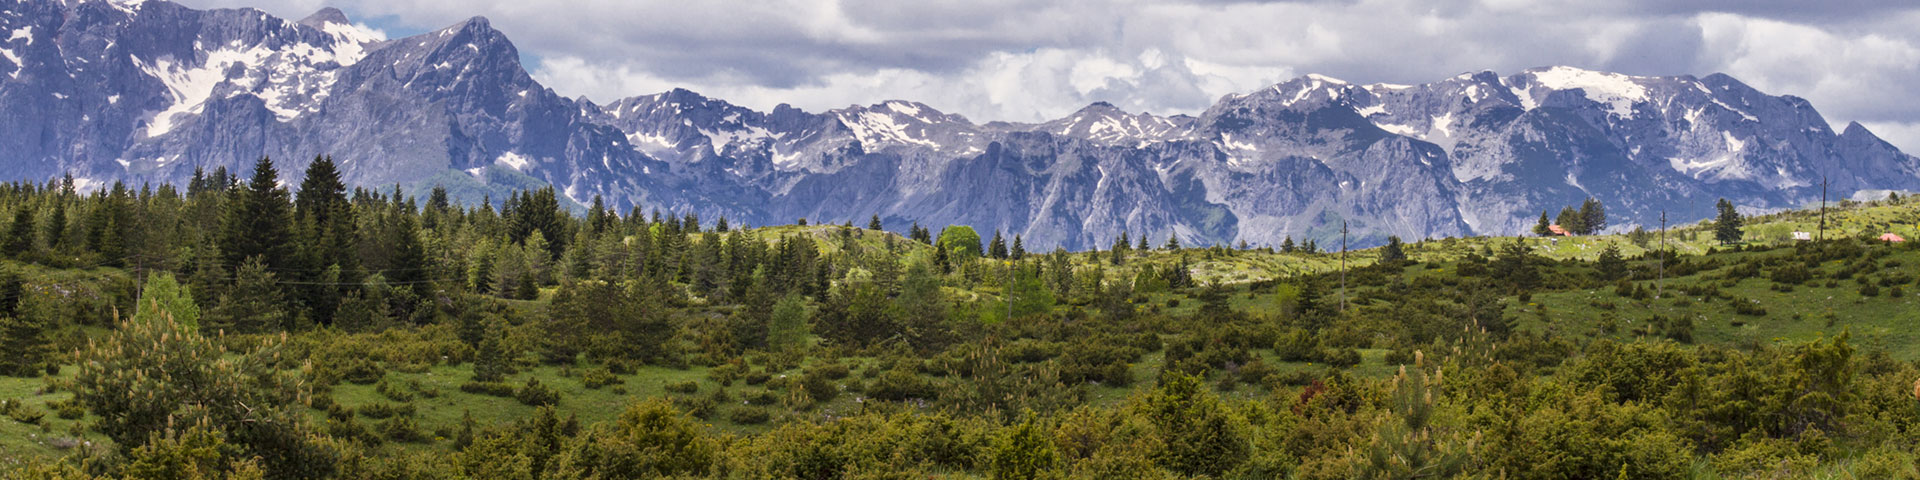 A green lanscape with mountains in the background.